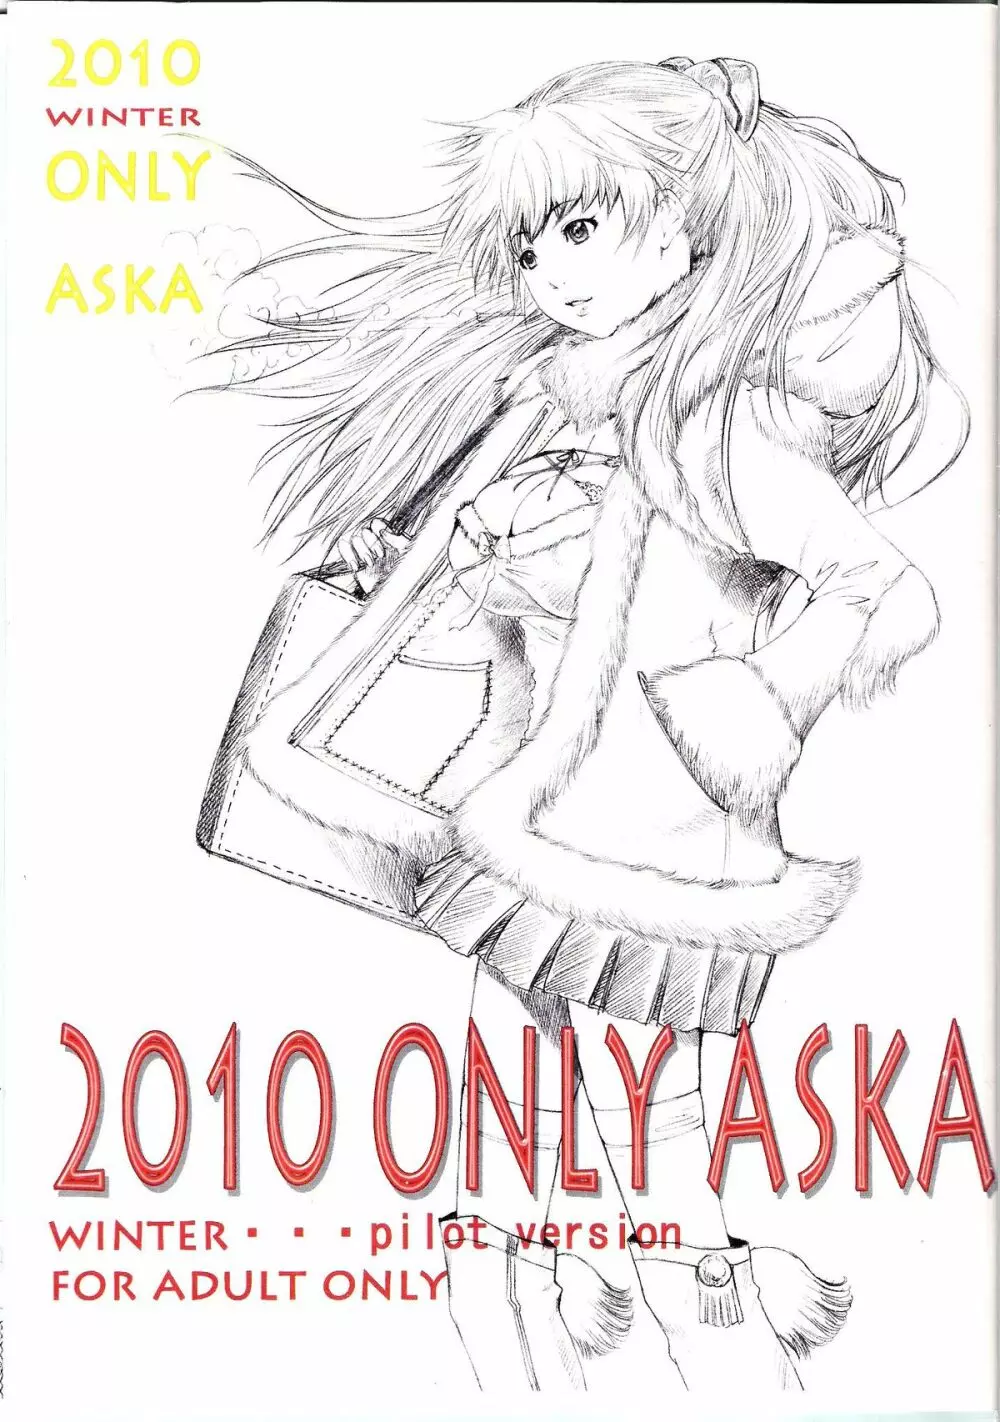 2010 ONLY ASKA WINTER pilot version - page1